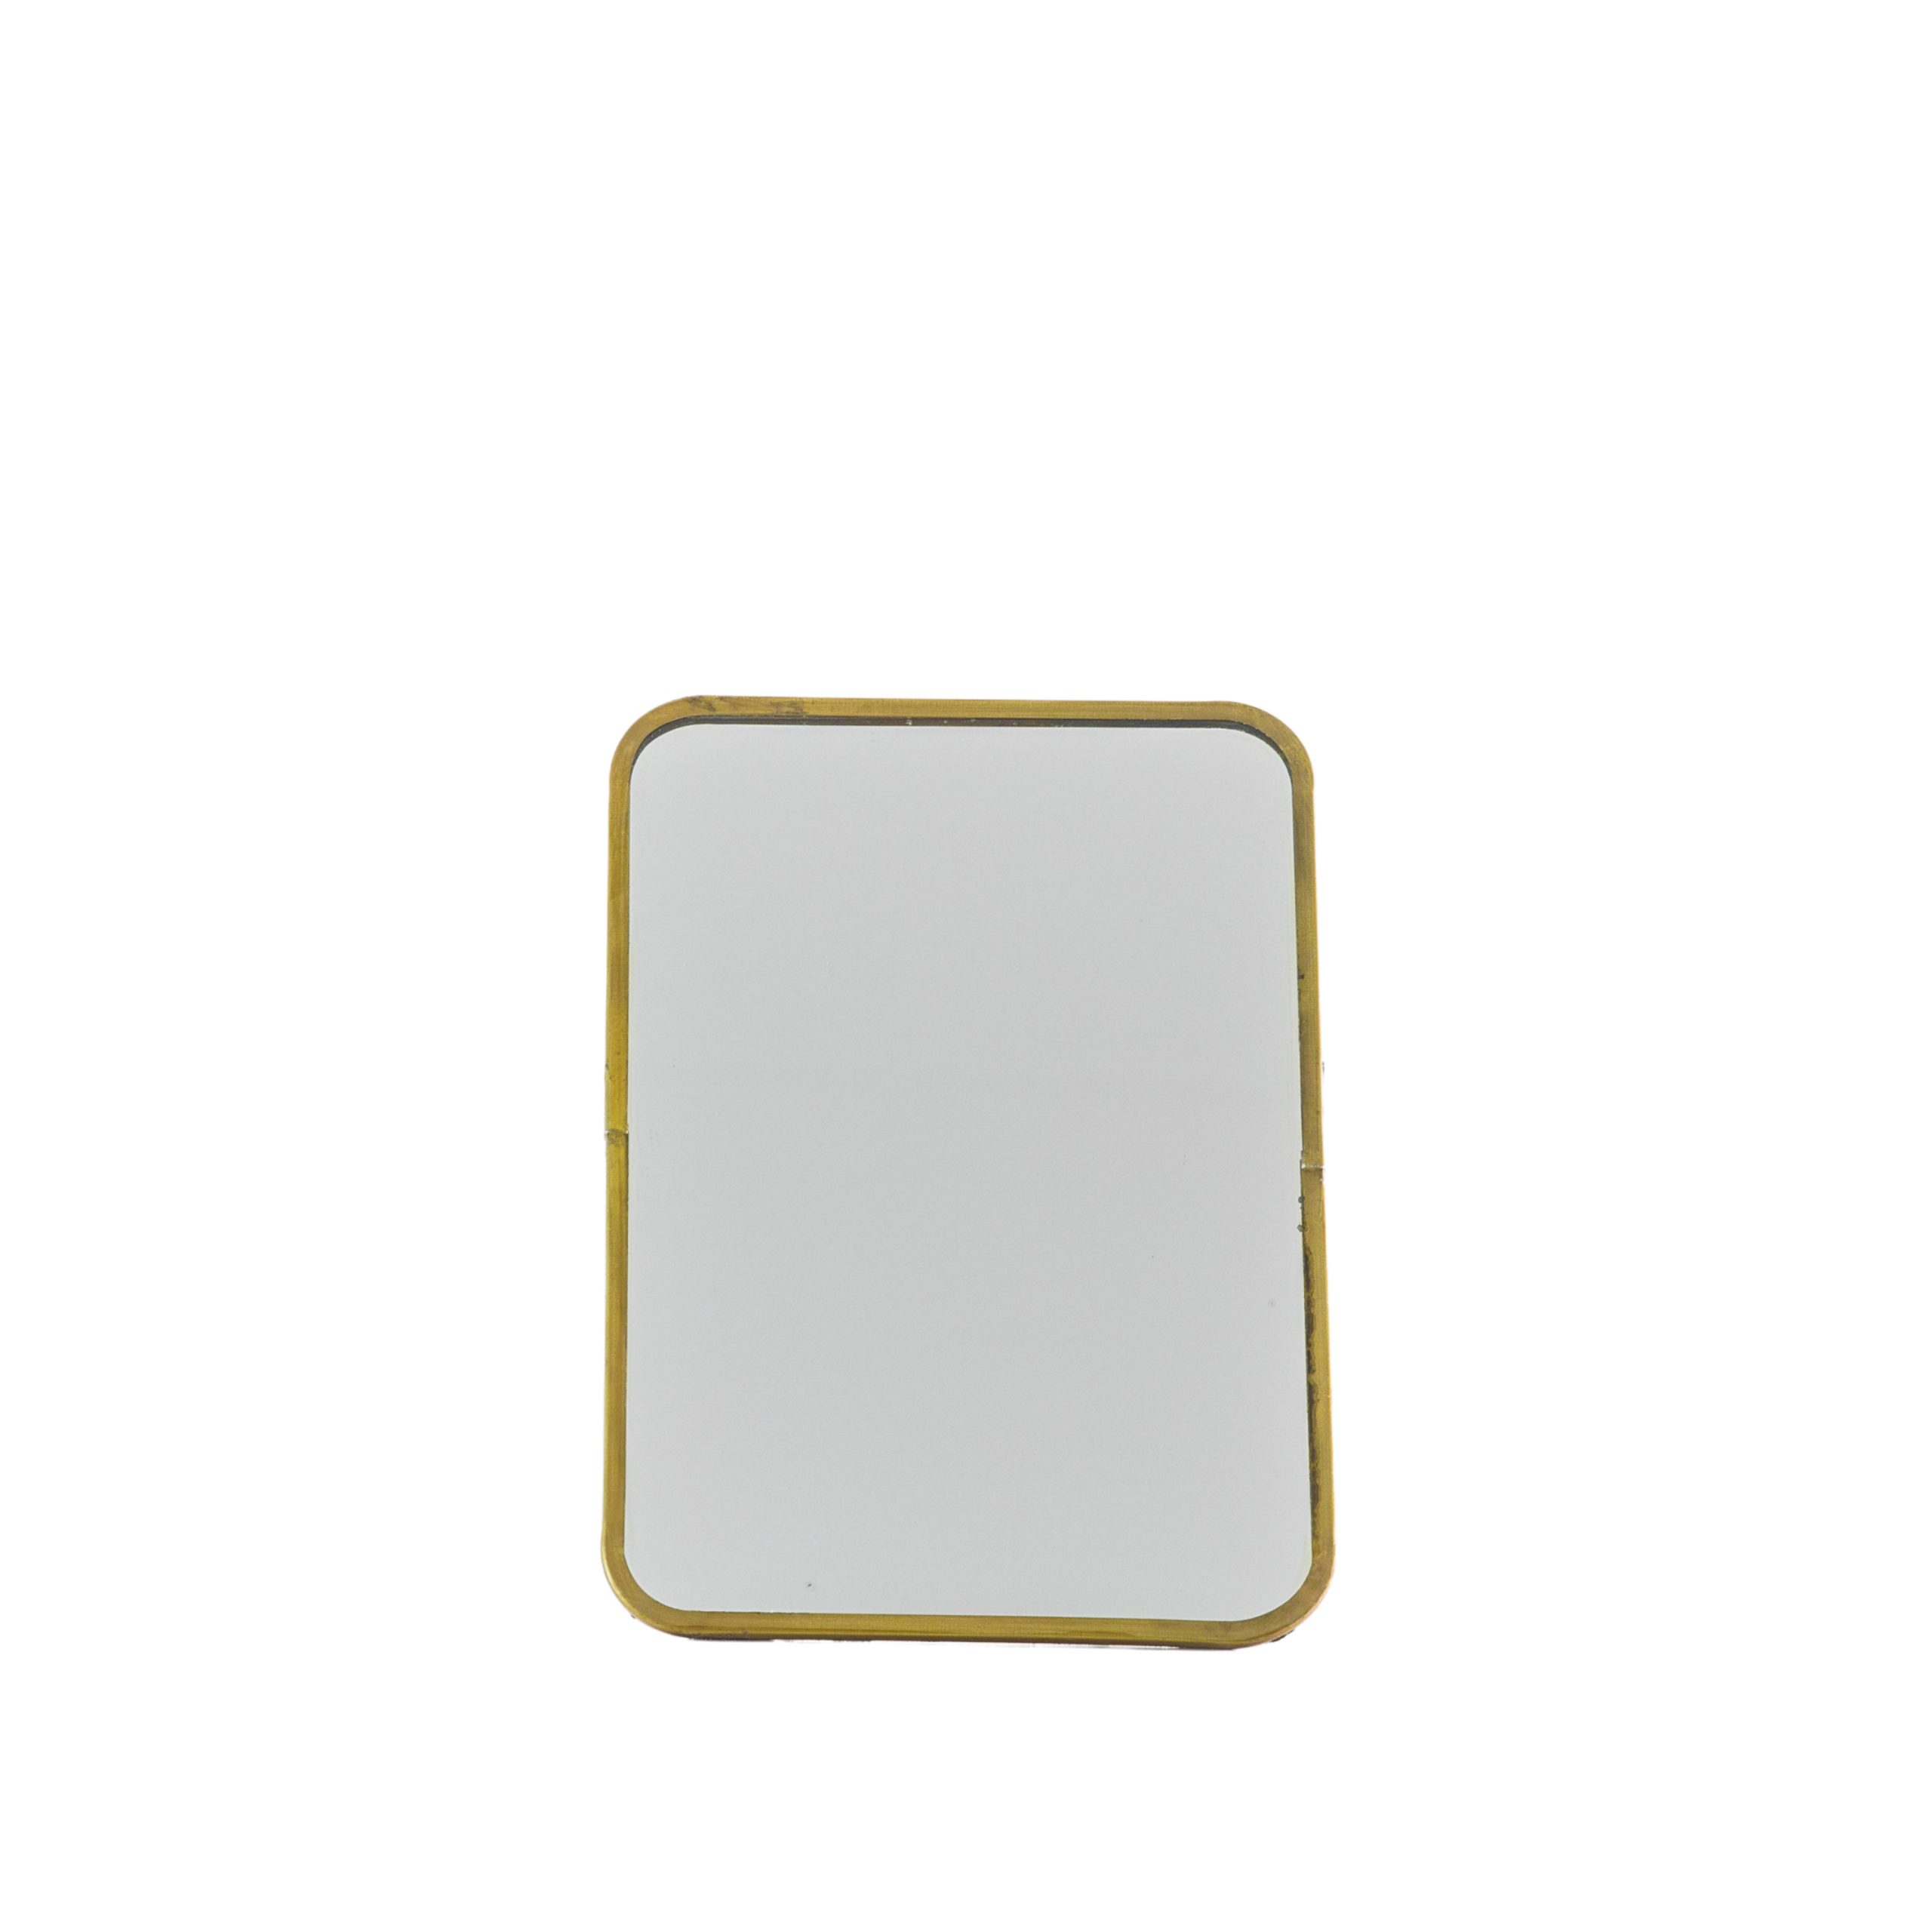 Gallery Direct Nala Mirror with Stand Antique Brass